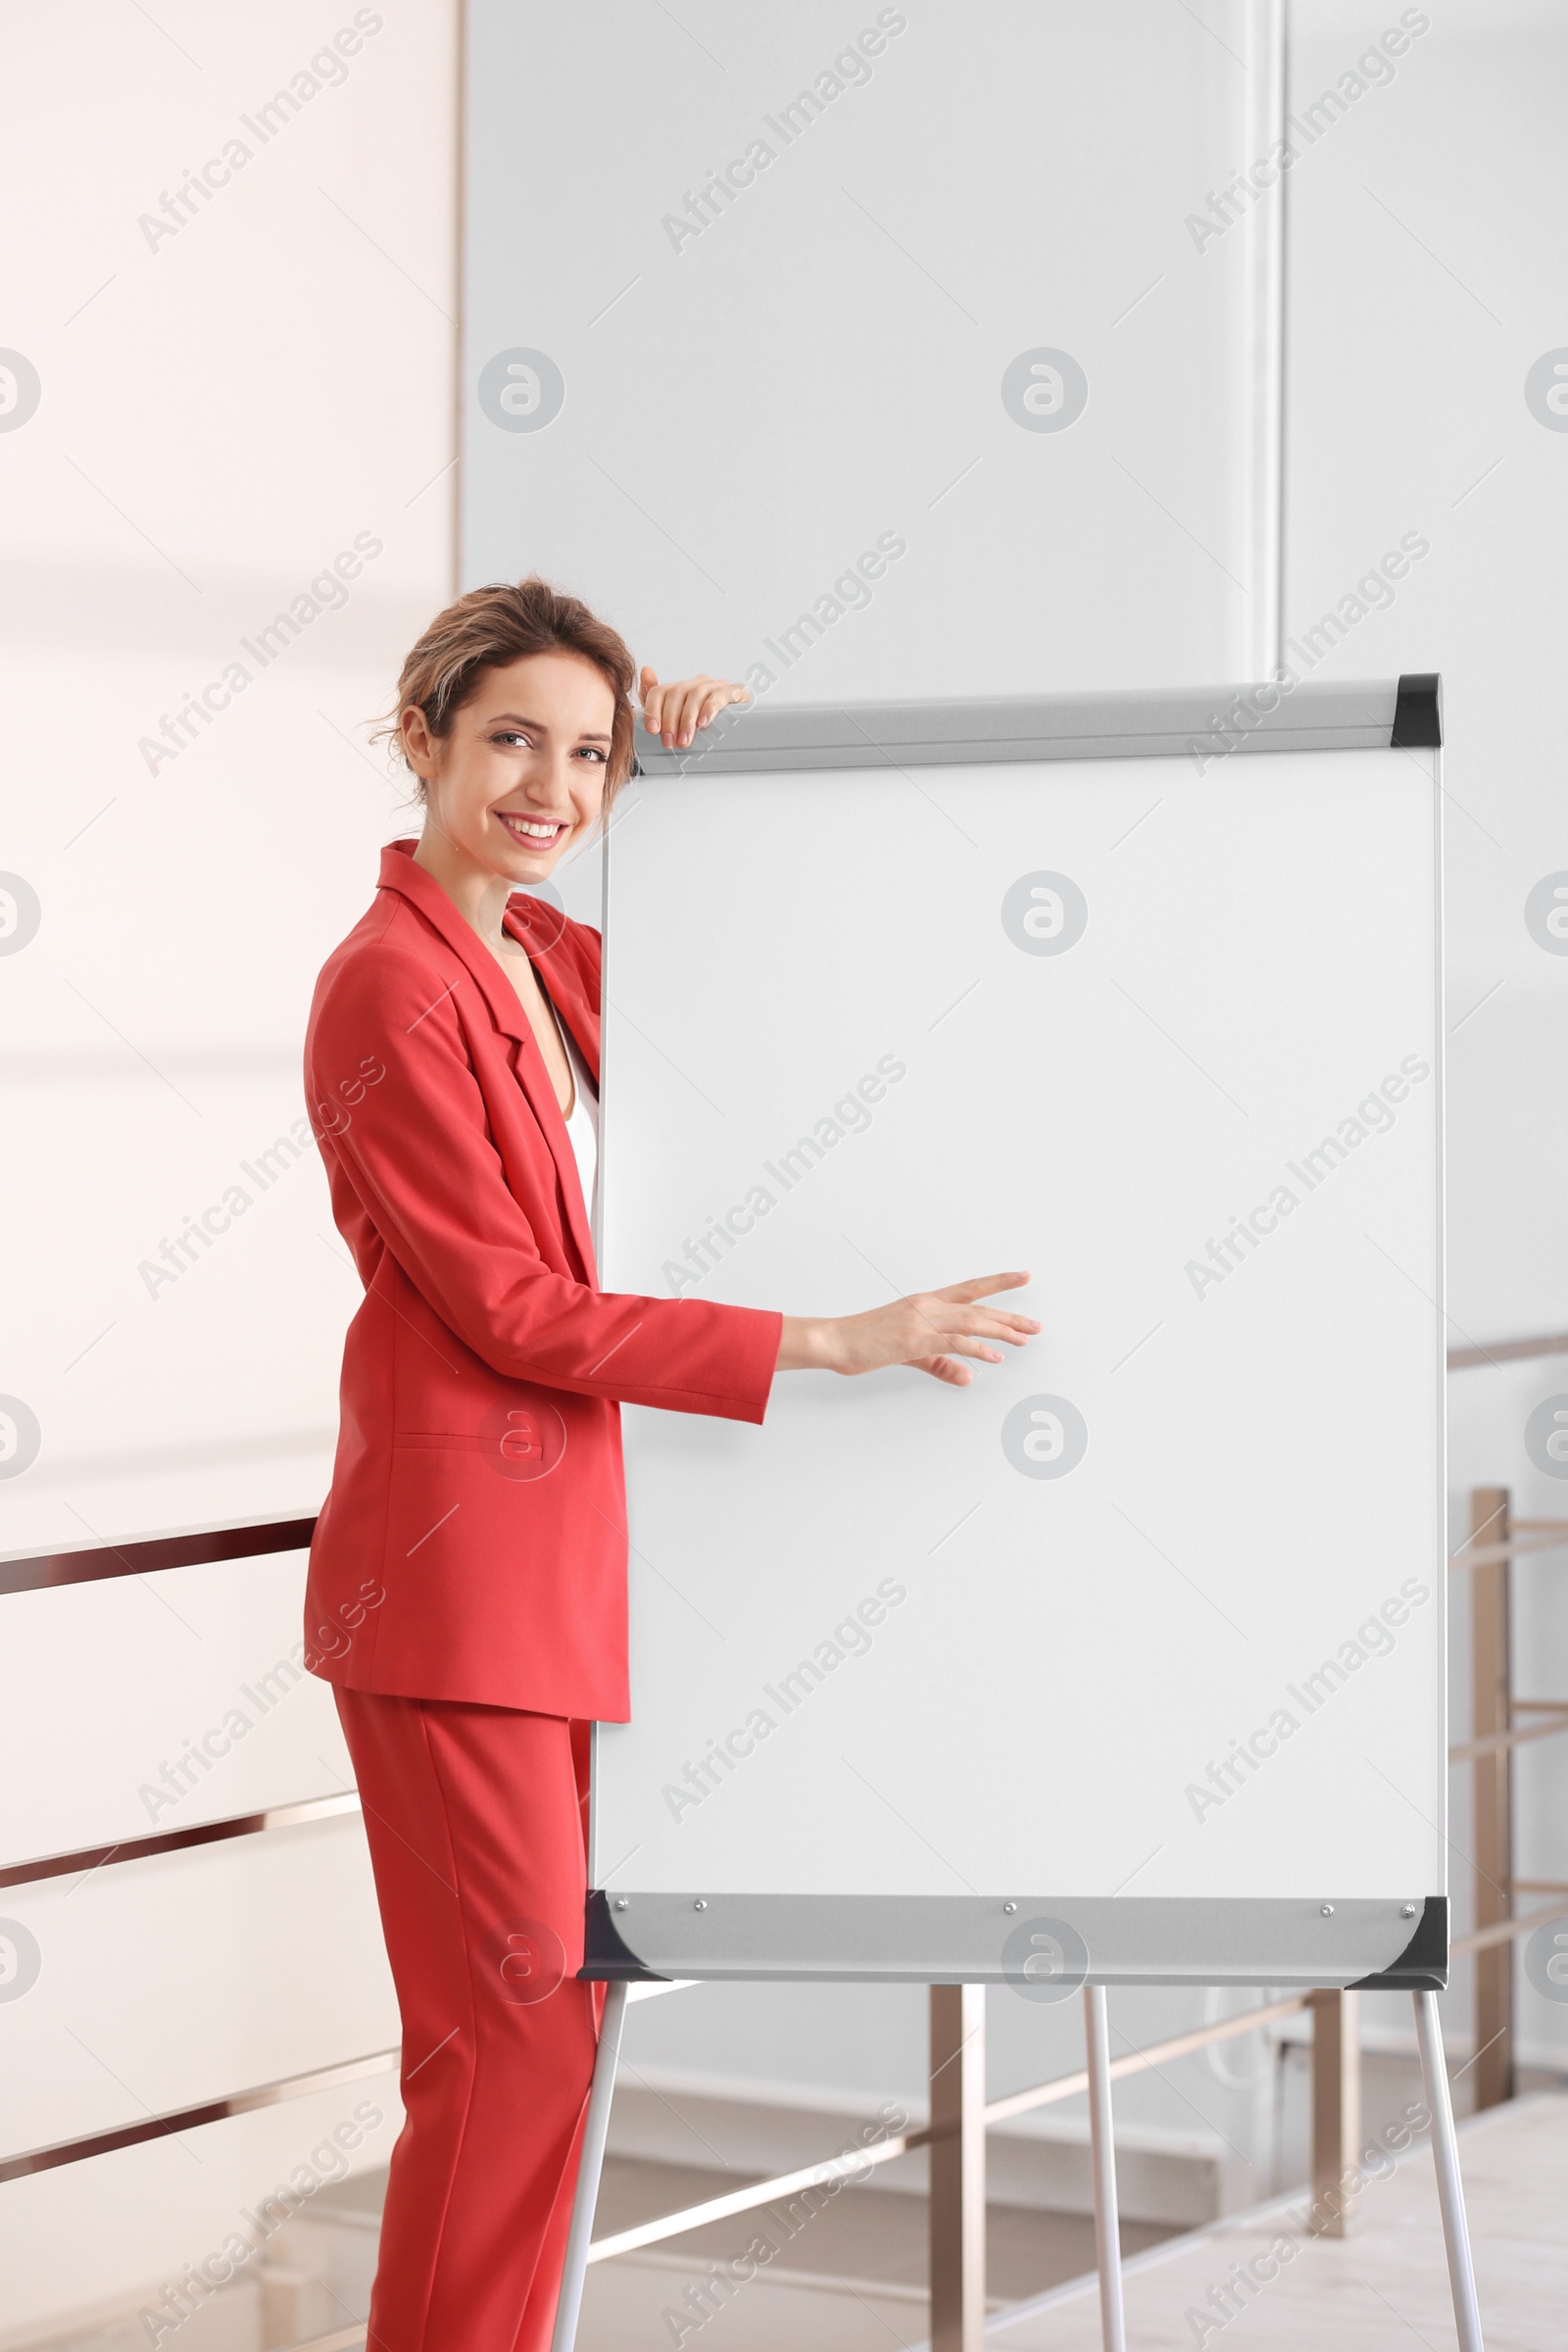 Photo of Female business trainer giving presentation on whiteboard indoors